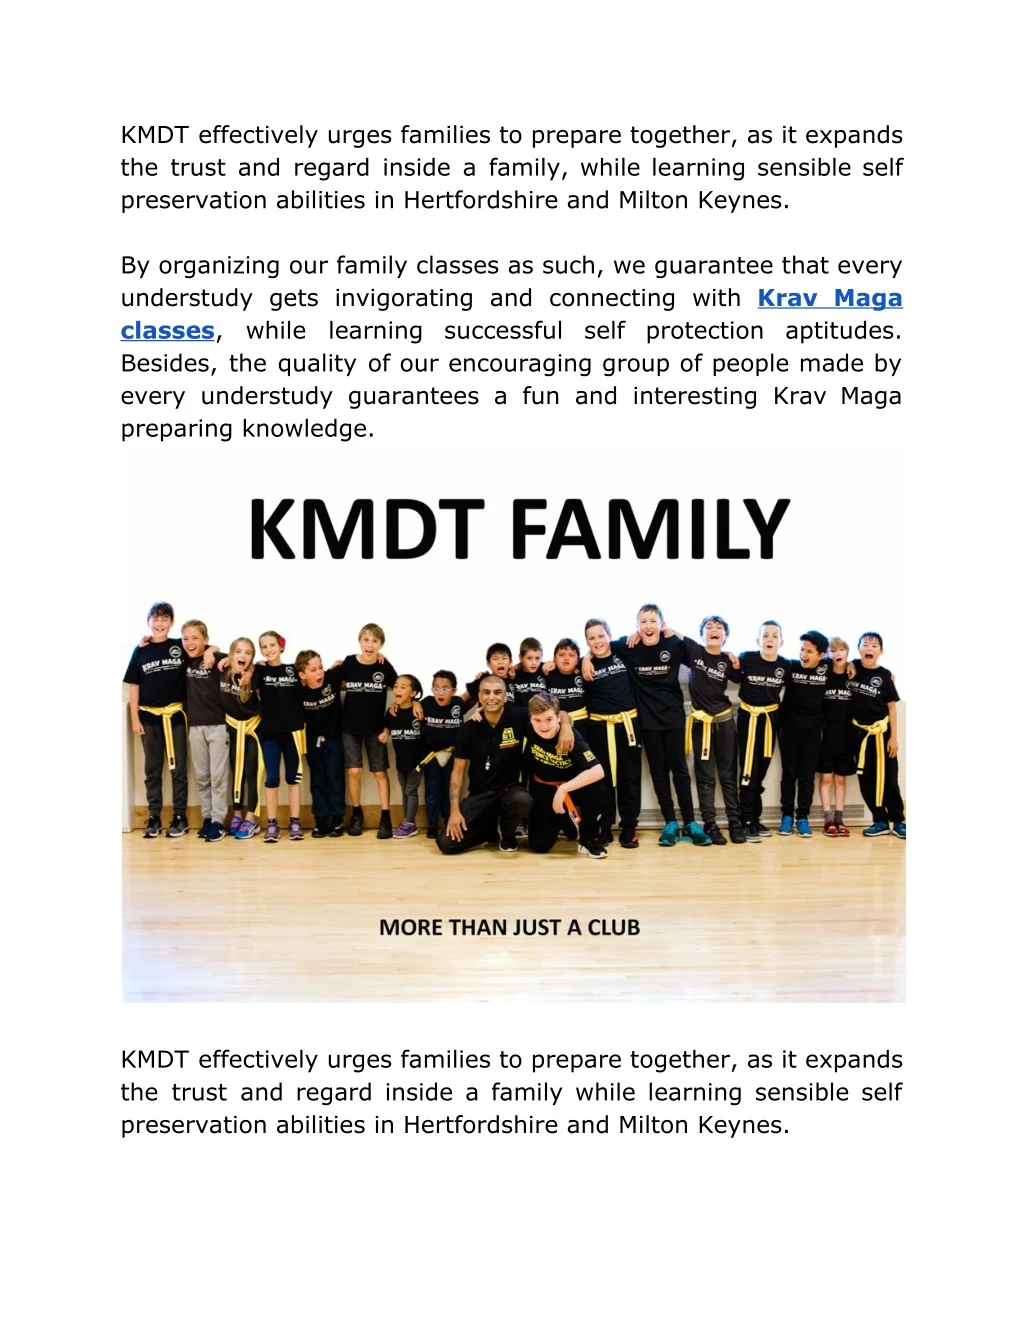 kmdt effectively urges families to prepare